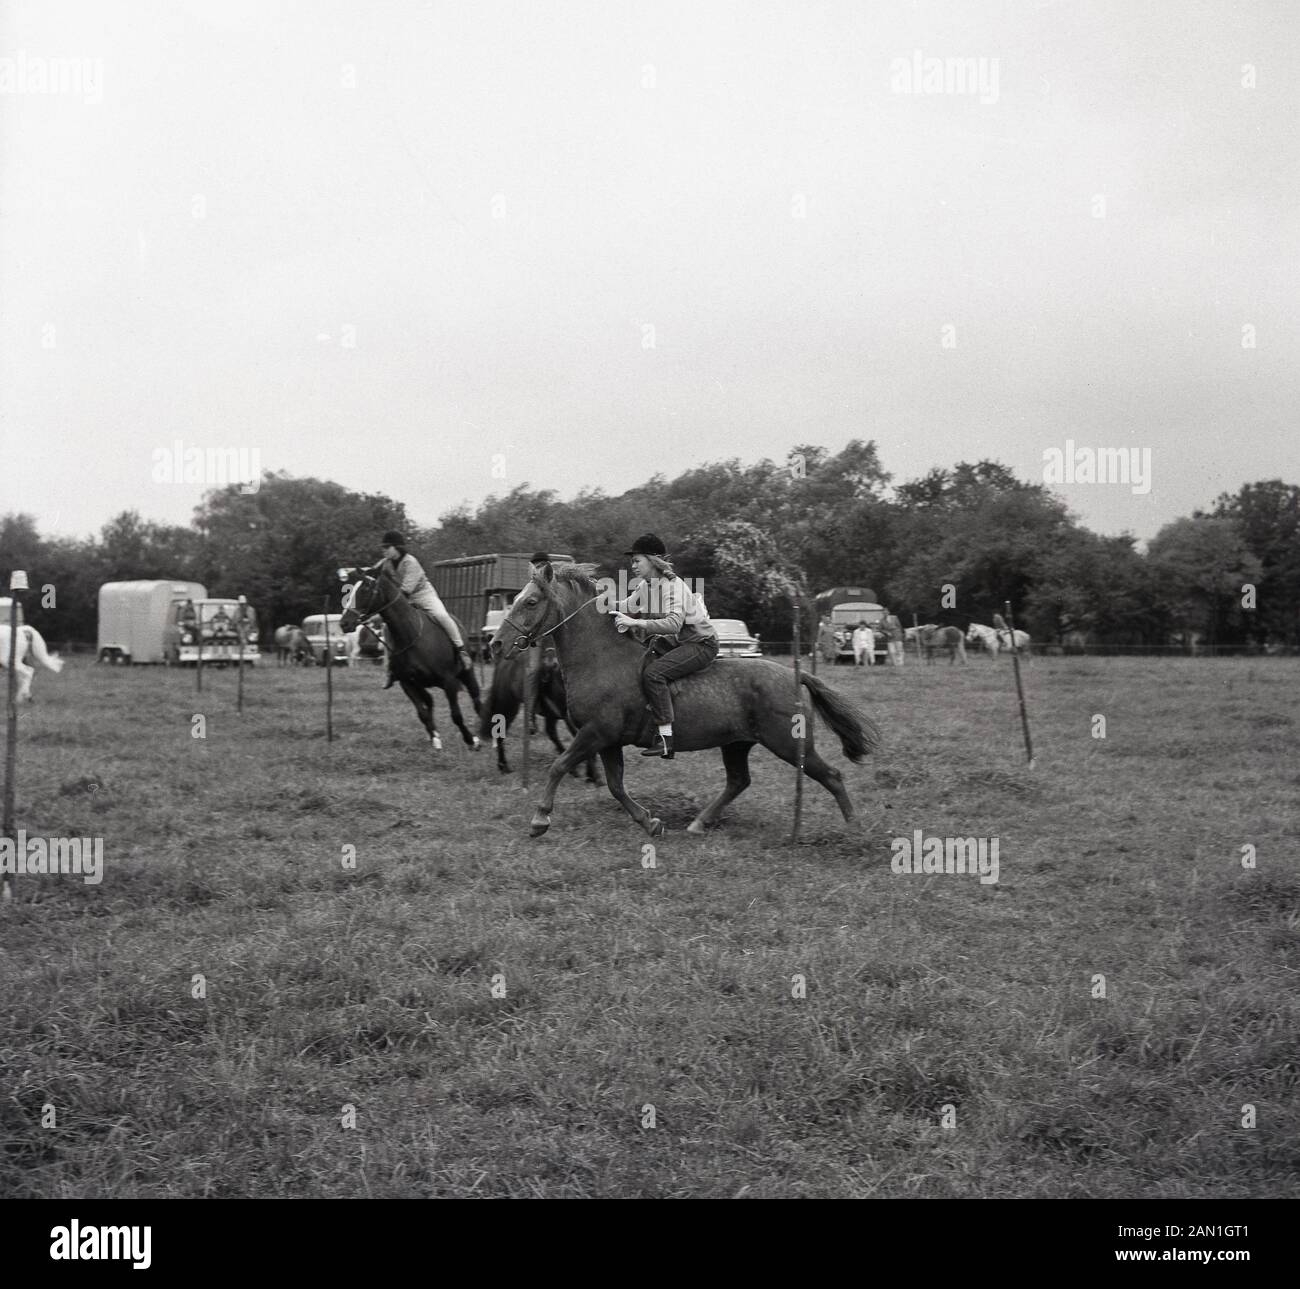 1967, historical, young women competing in a 'gymkhana' in a field at Wendover, Buckinghamshire, England. An equestrian event involving speed racing and timed games for riders on horses, Gymkhanas are often organised by Pony Clubs with the emphasis on young people's participation. Stock Photo